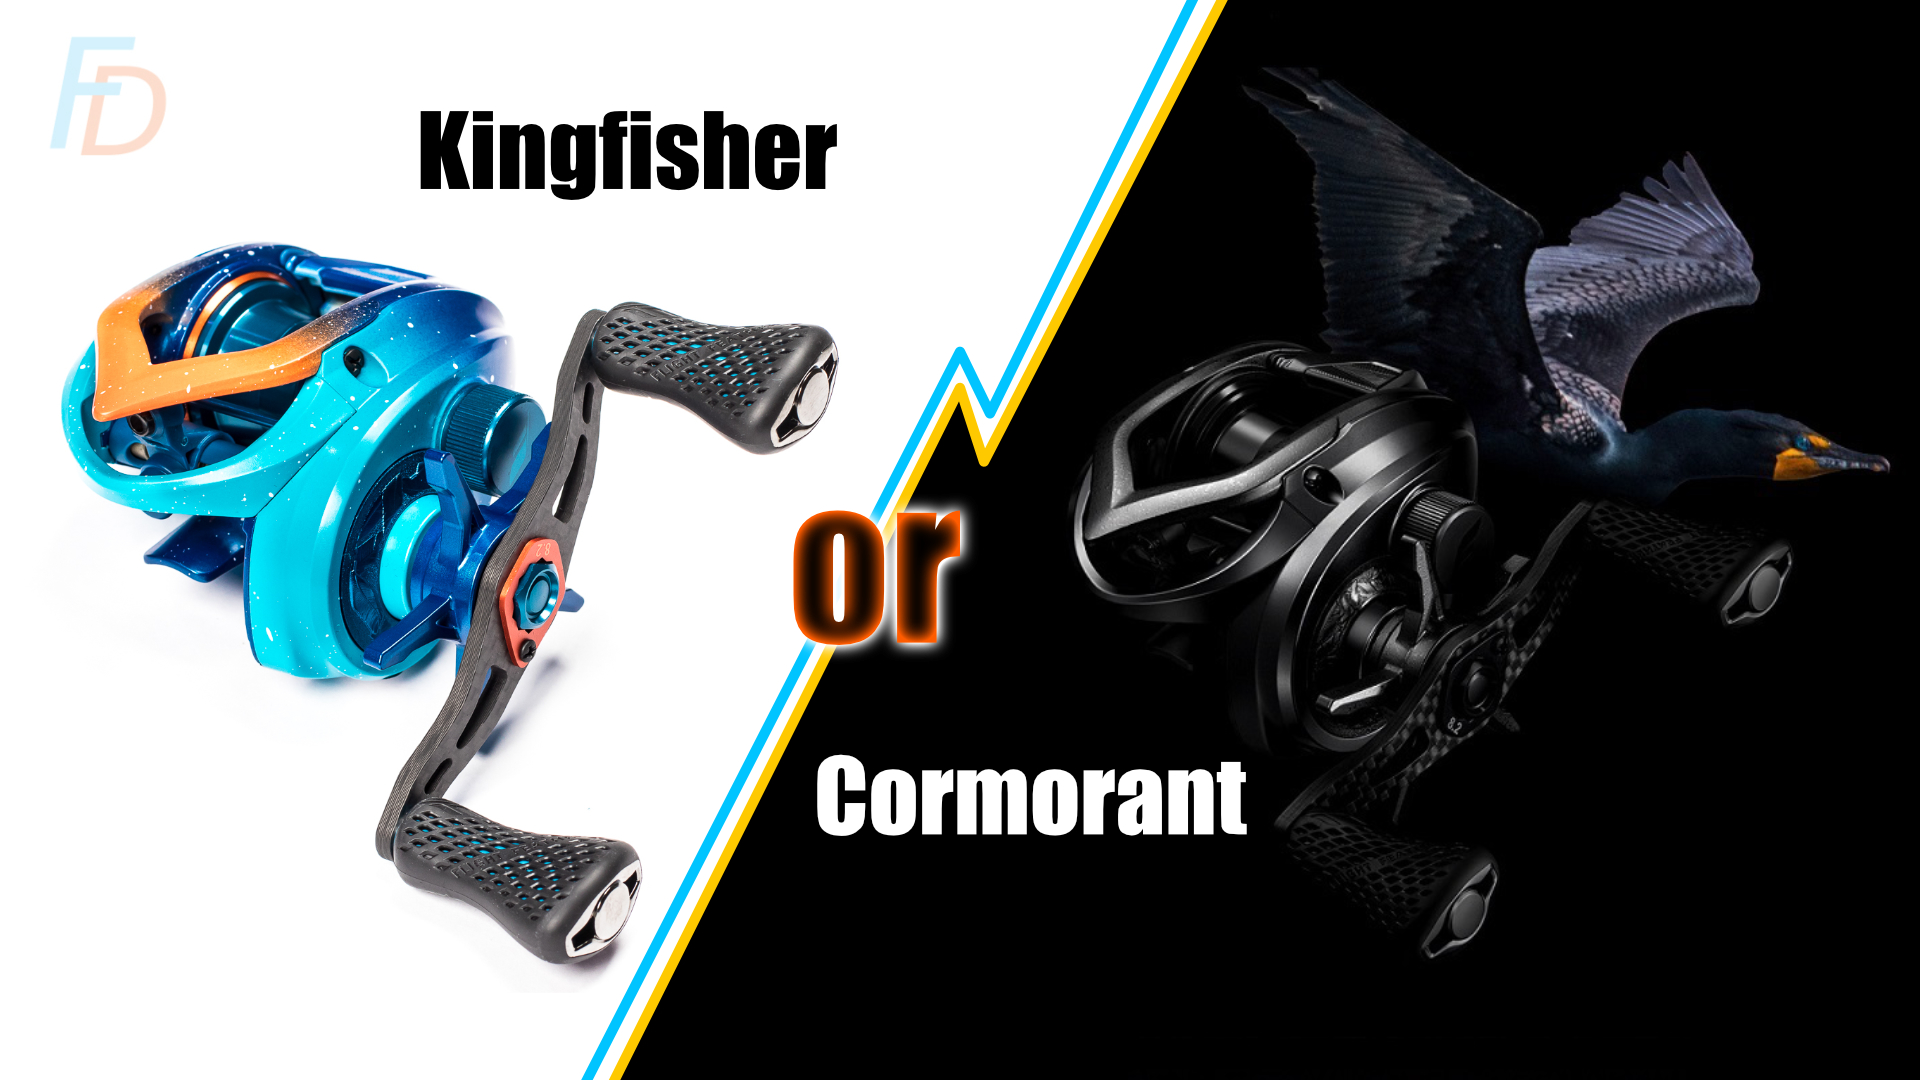 Kingfisher and Cormorant Best Chinese BFS reels